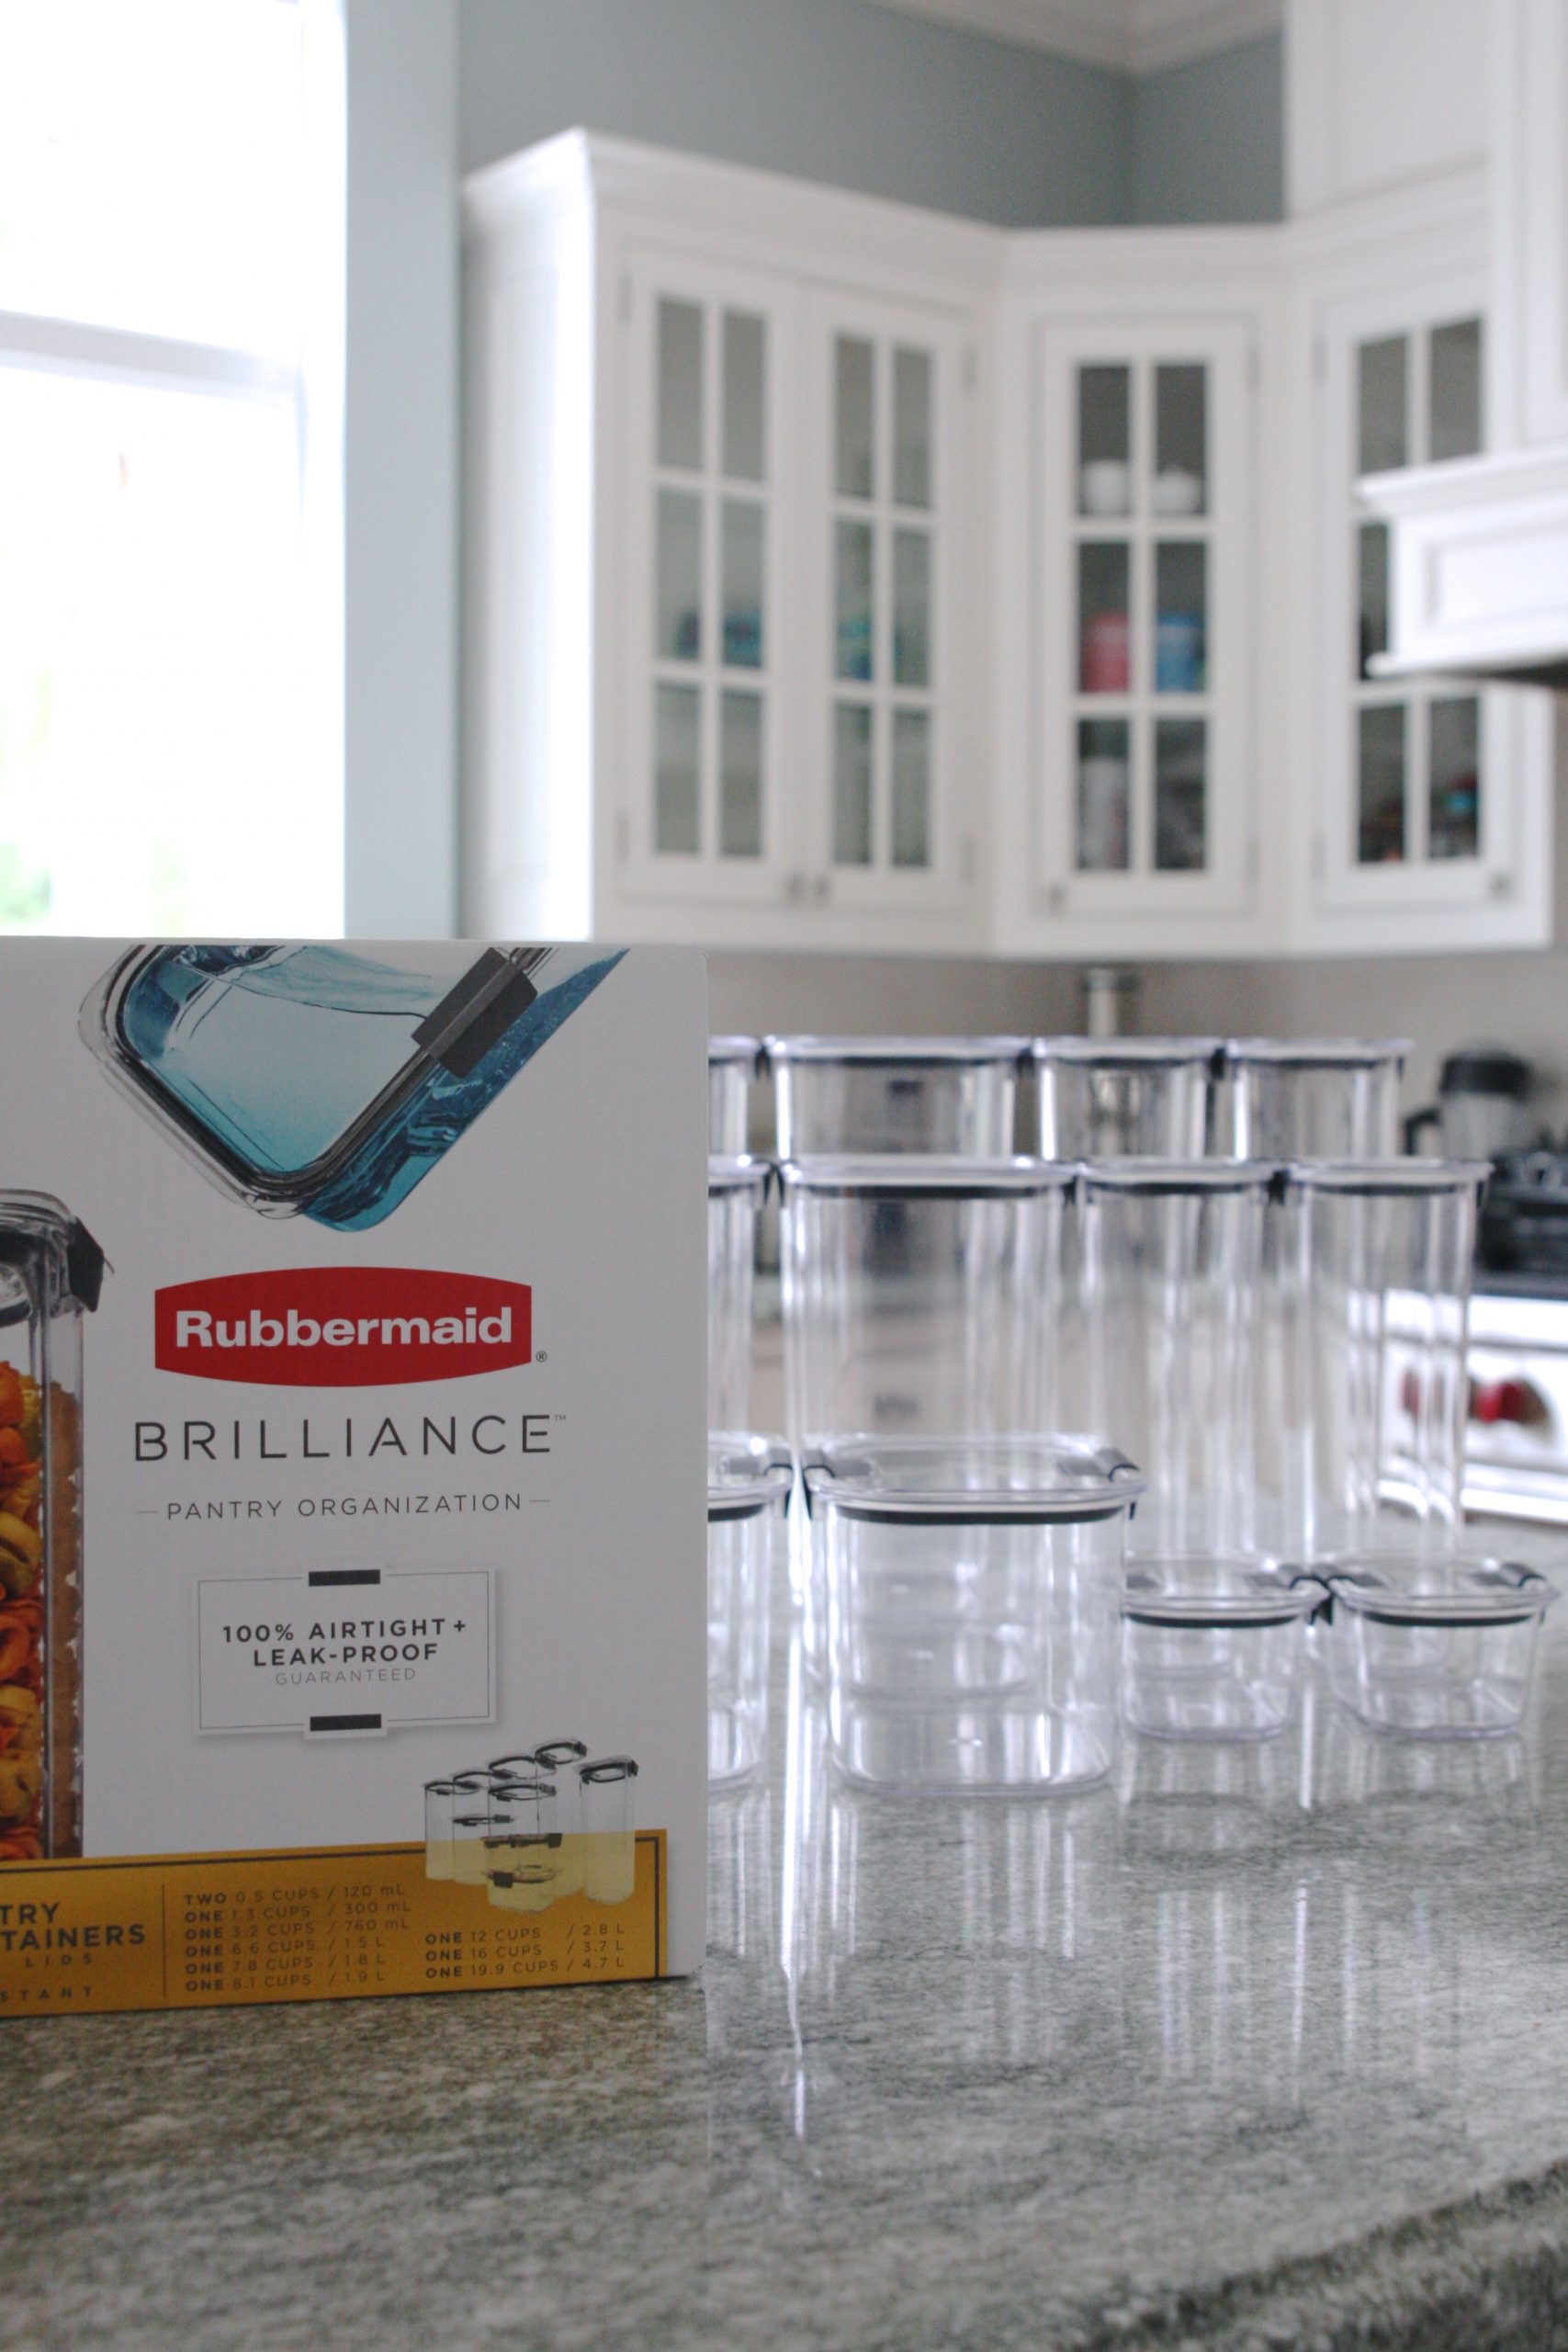  Rubbermaid Brilliance Pantry 16 and 7.8 Cup Baking